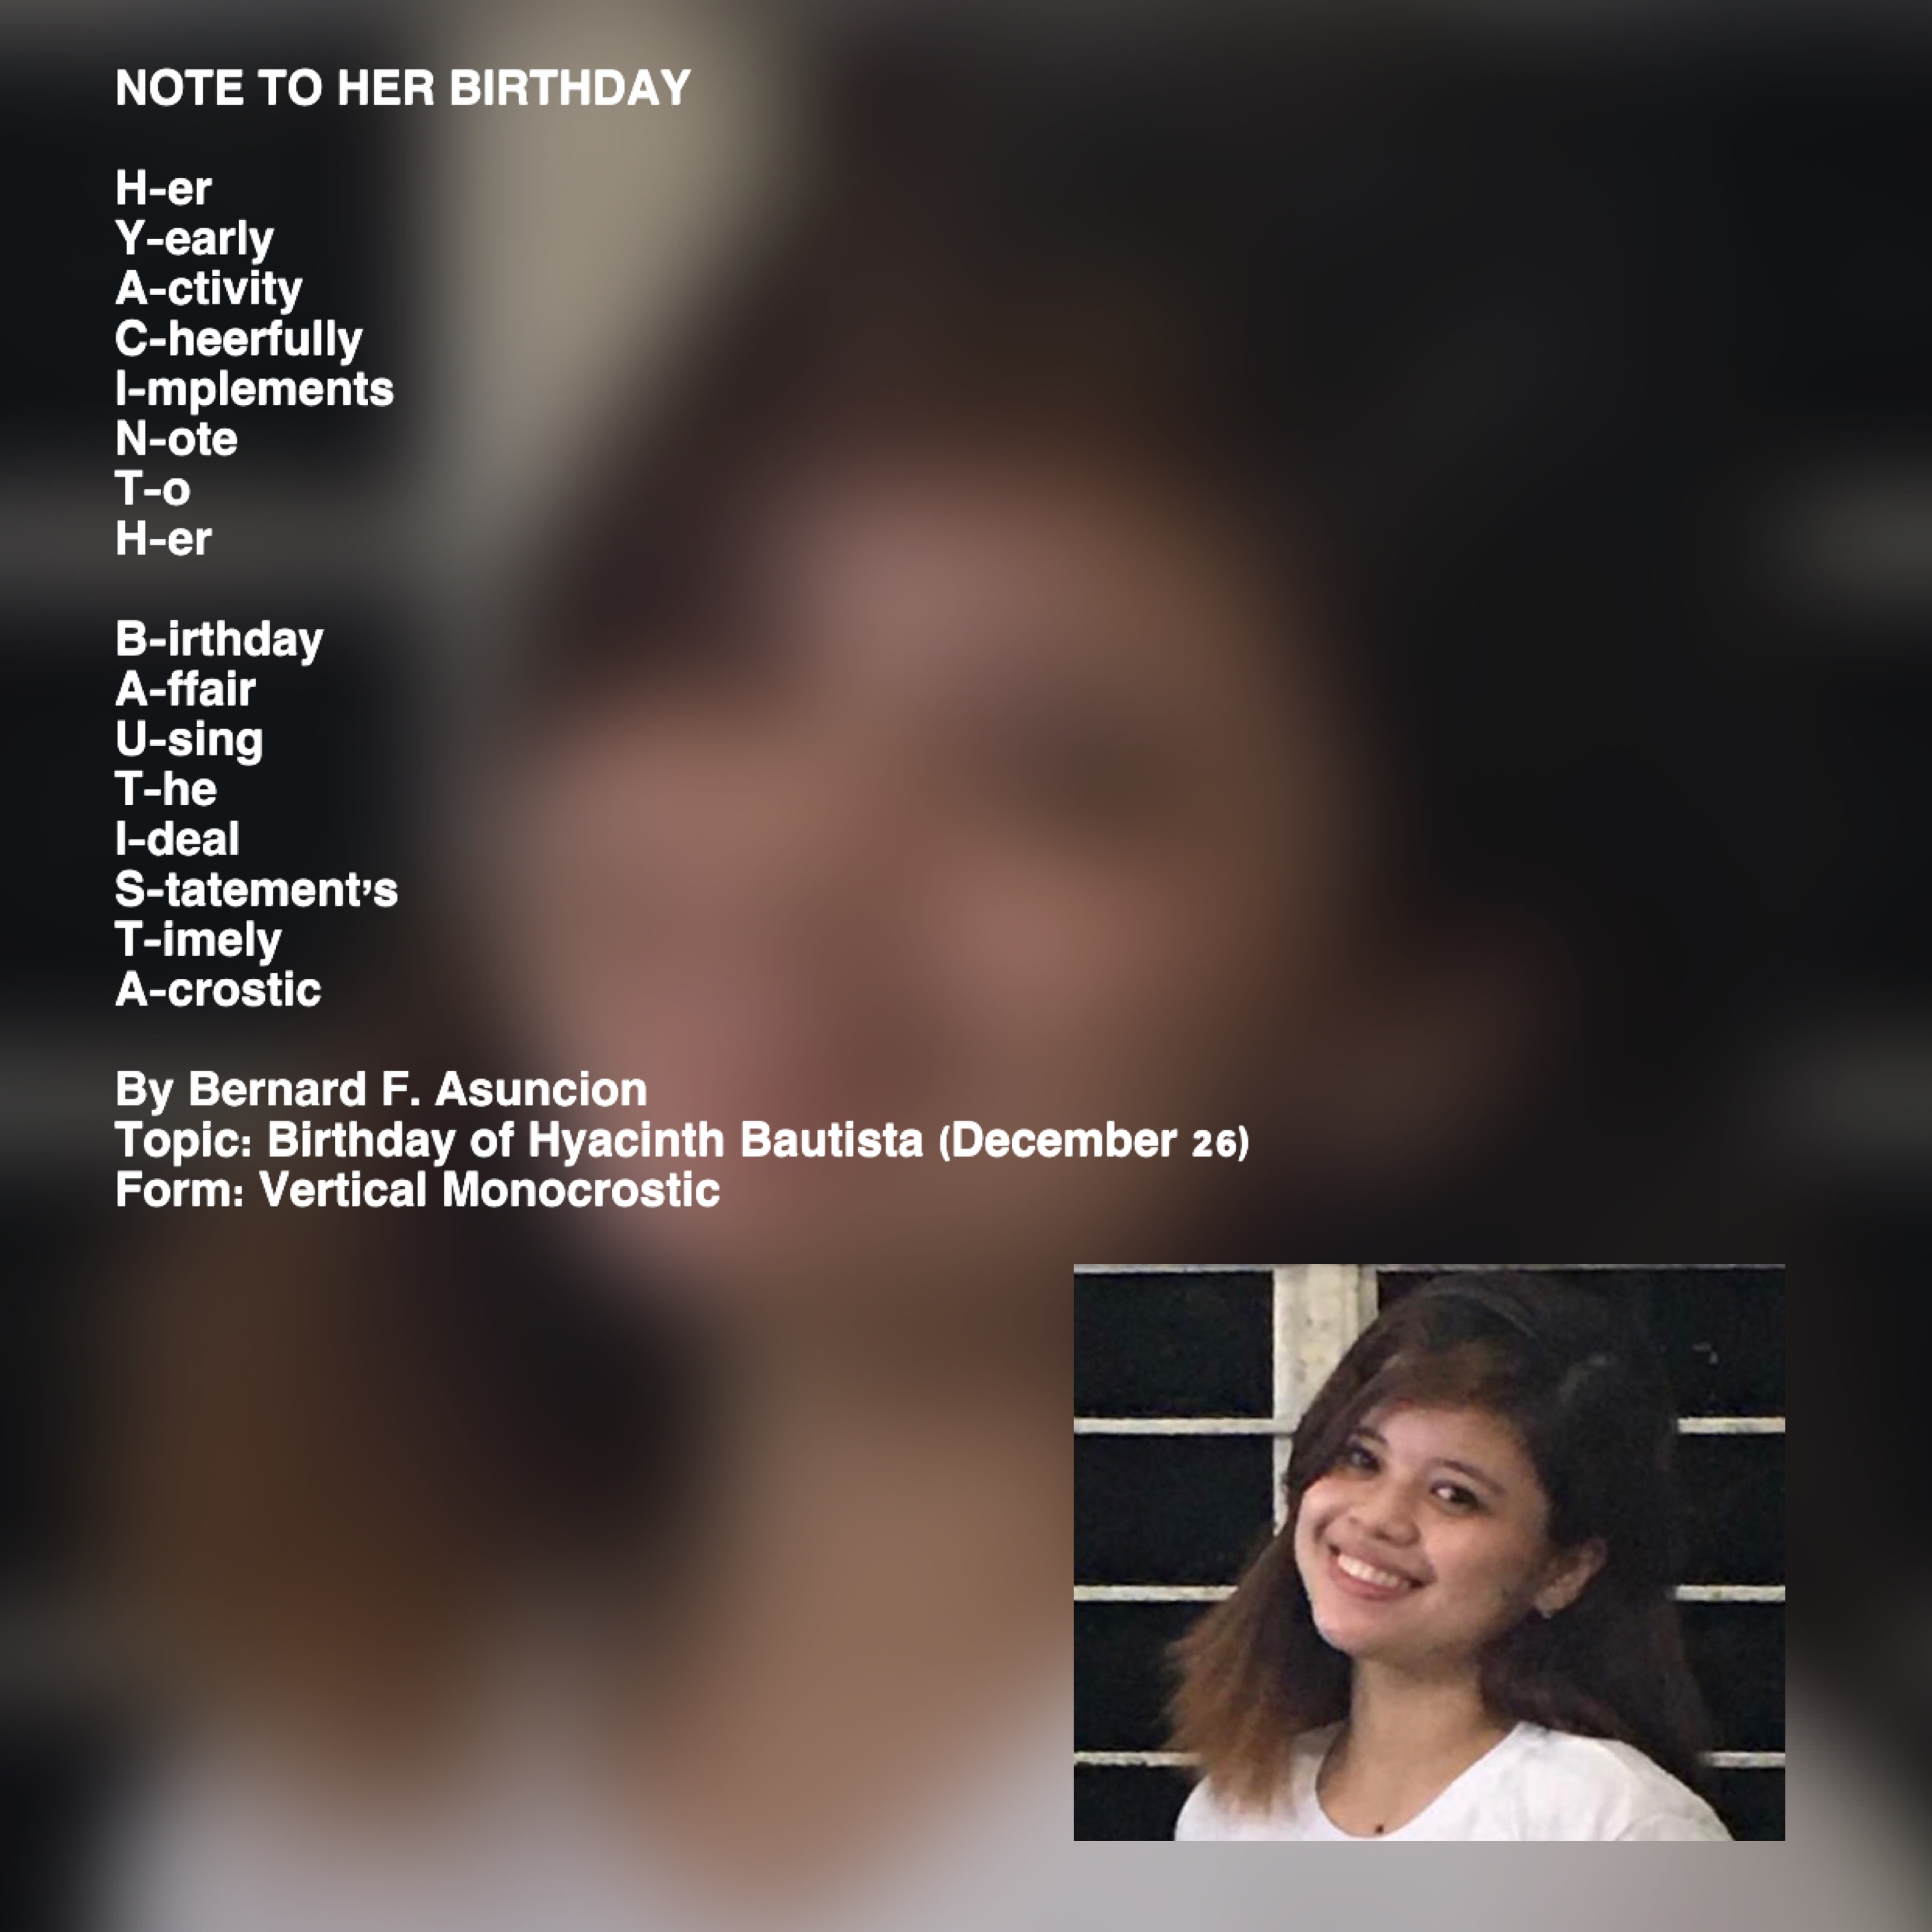 Note To Her Birthday